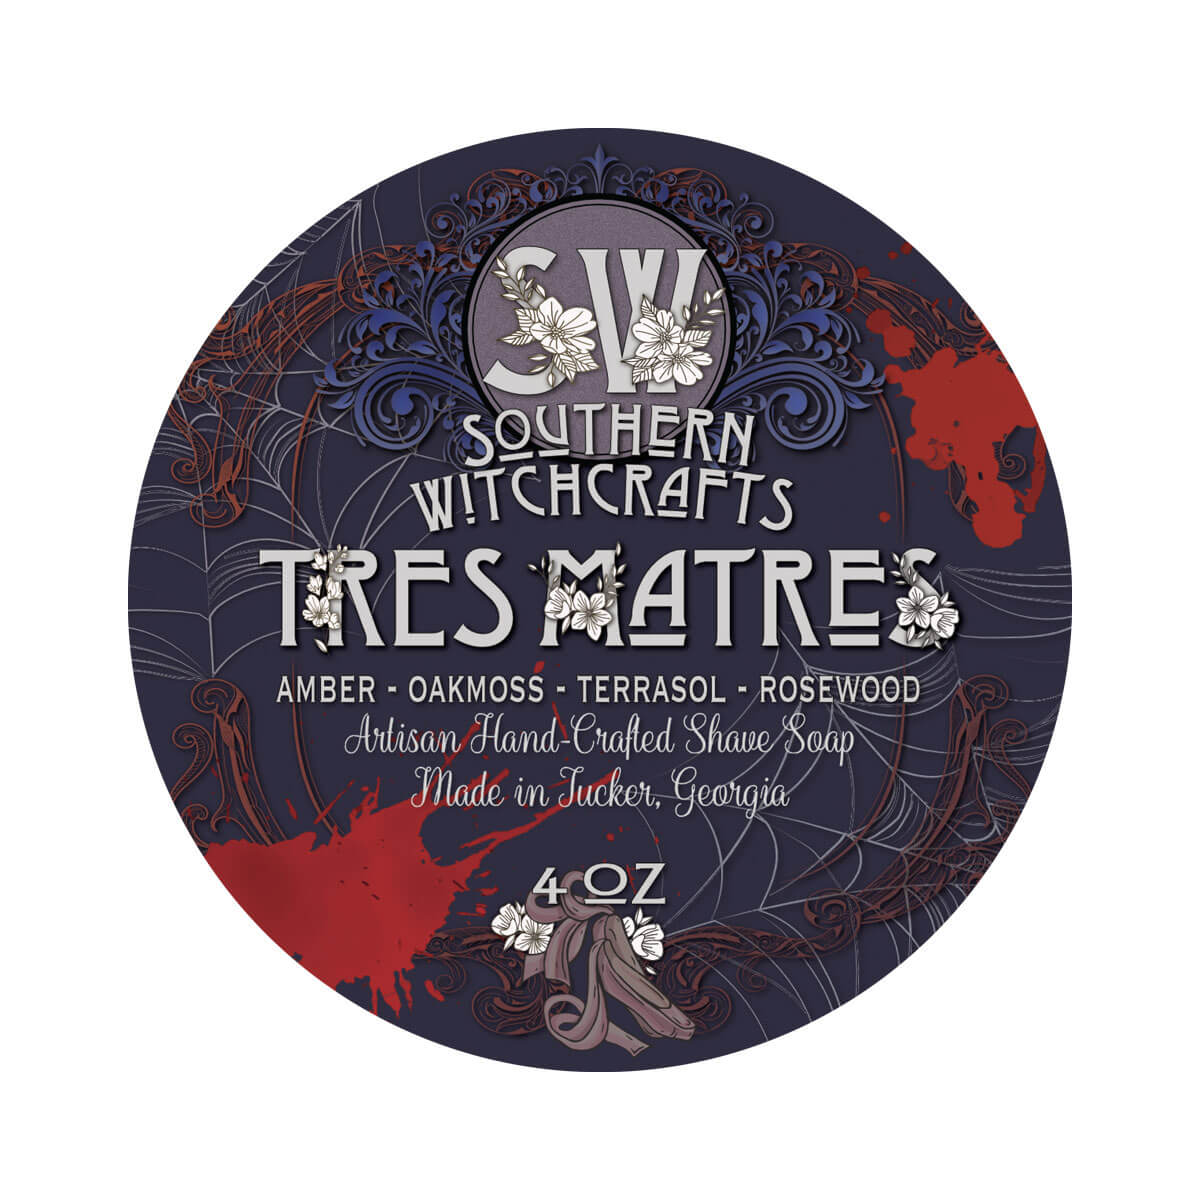 Southern Witchcrafts Tres Matres Shaving Soap